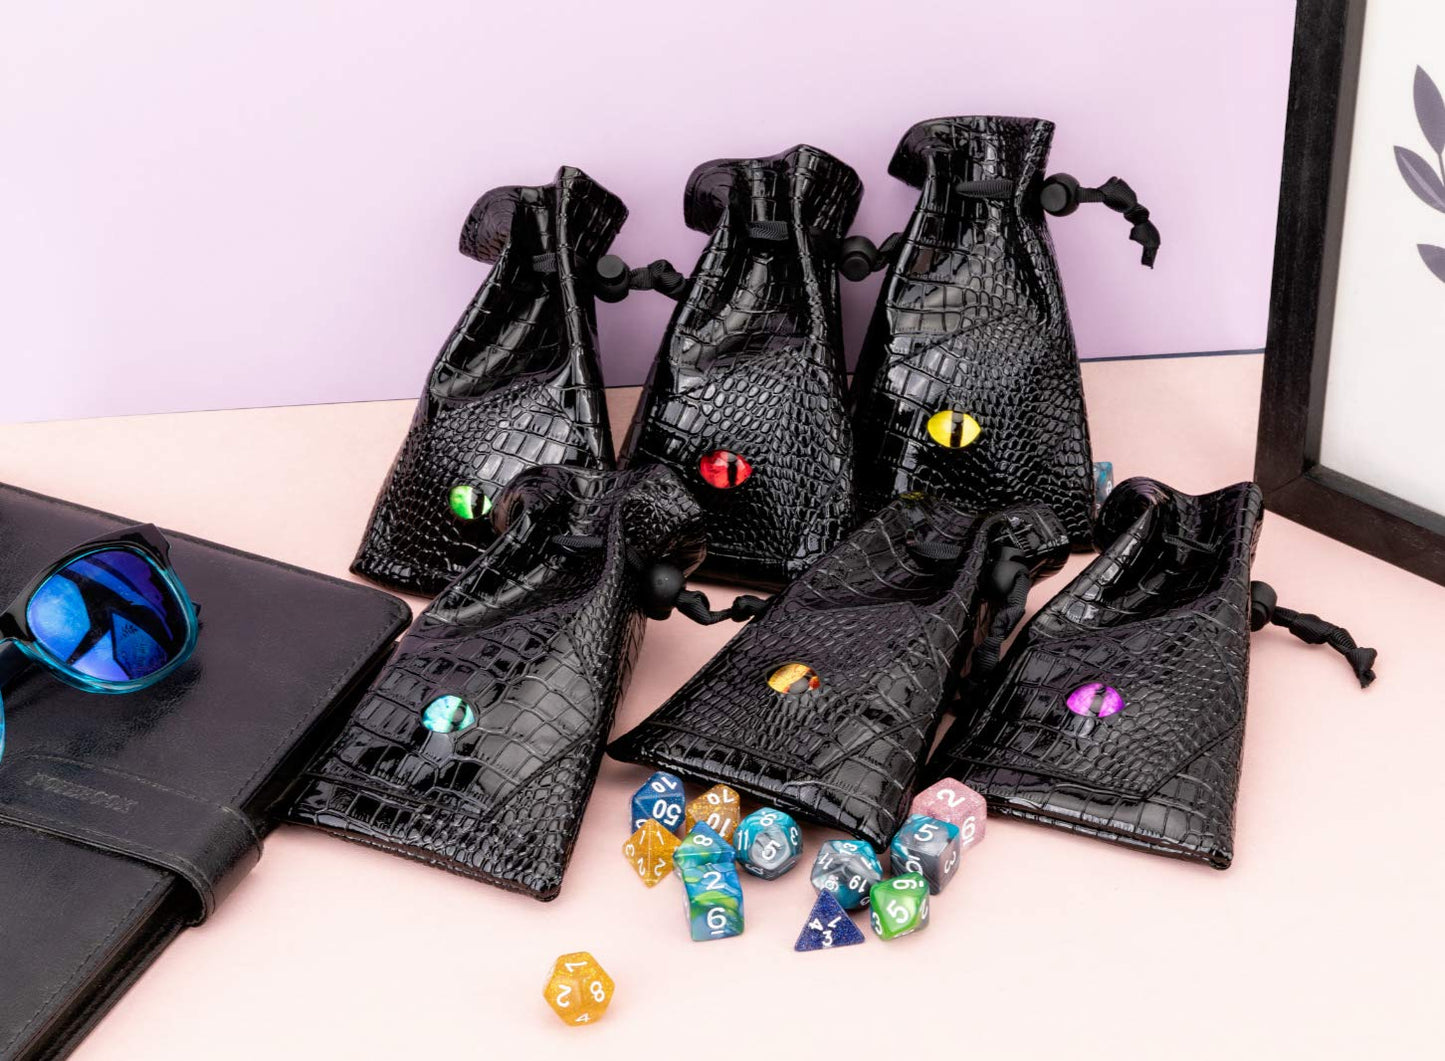 FREE Today: Drawstring DND Dice Pouch Bag (Random Color)